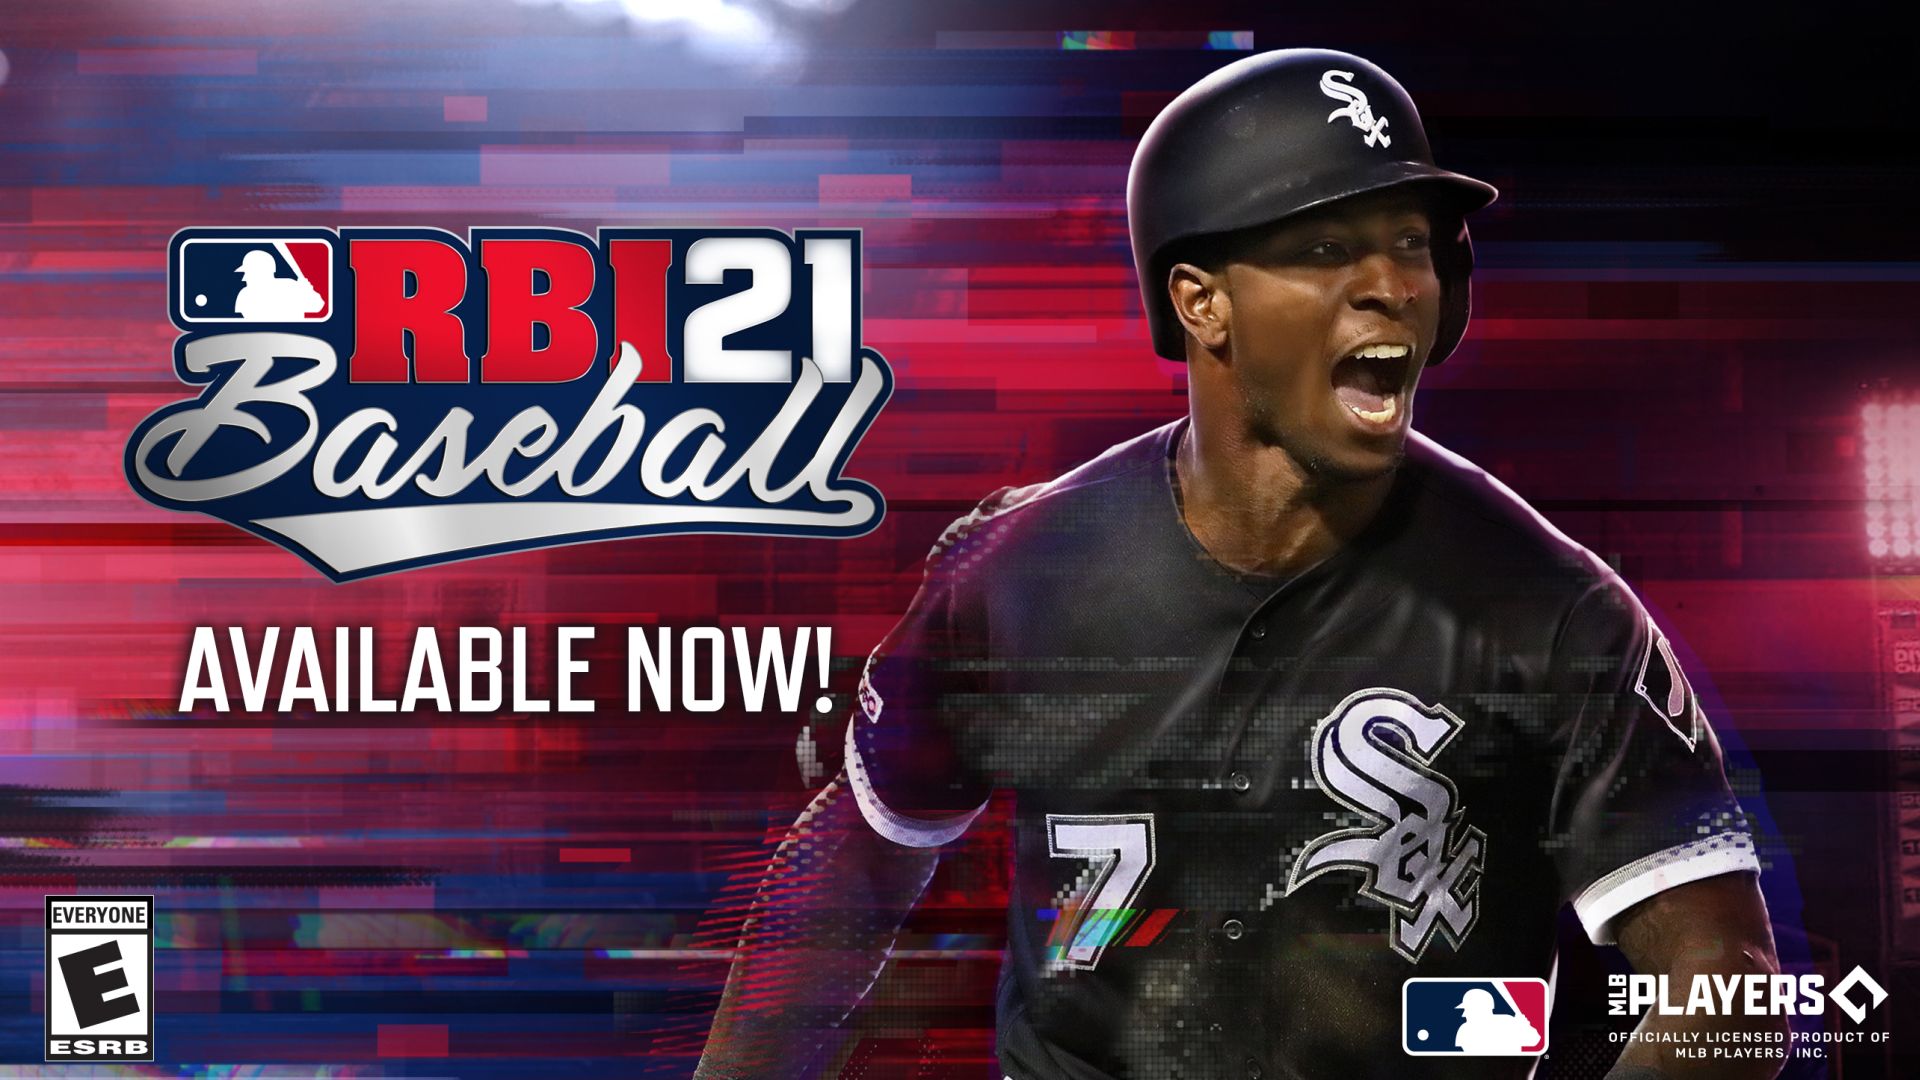 r-b-i-baseball-21-is-available-now-xbox-wire